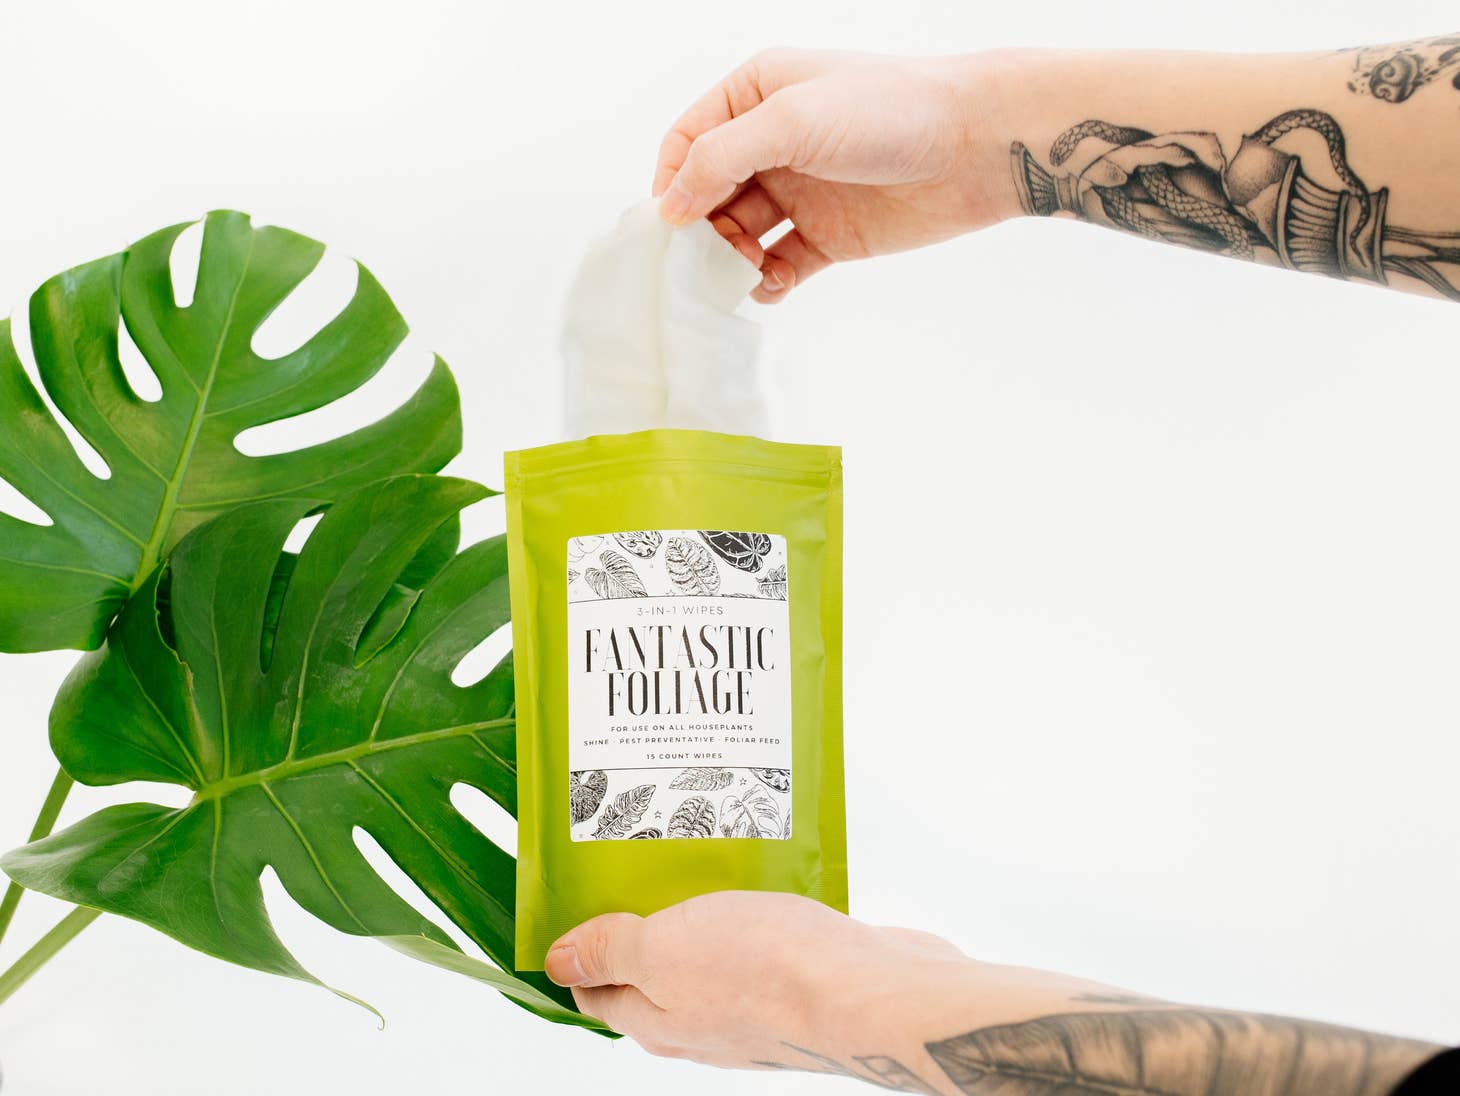 3-in-1 Neem and Peppermint Plant Wipes